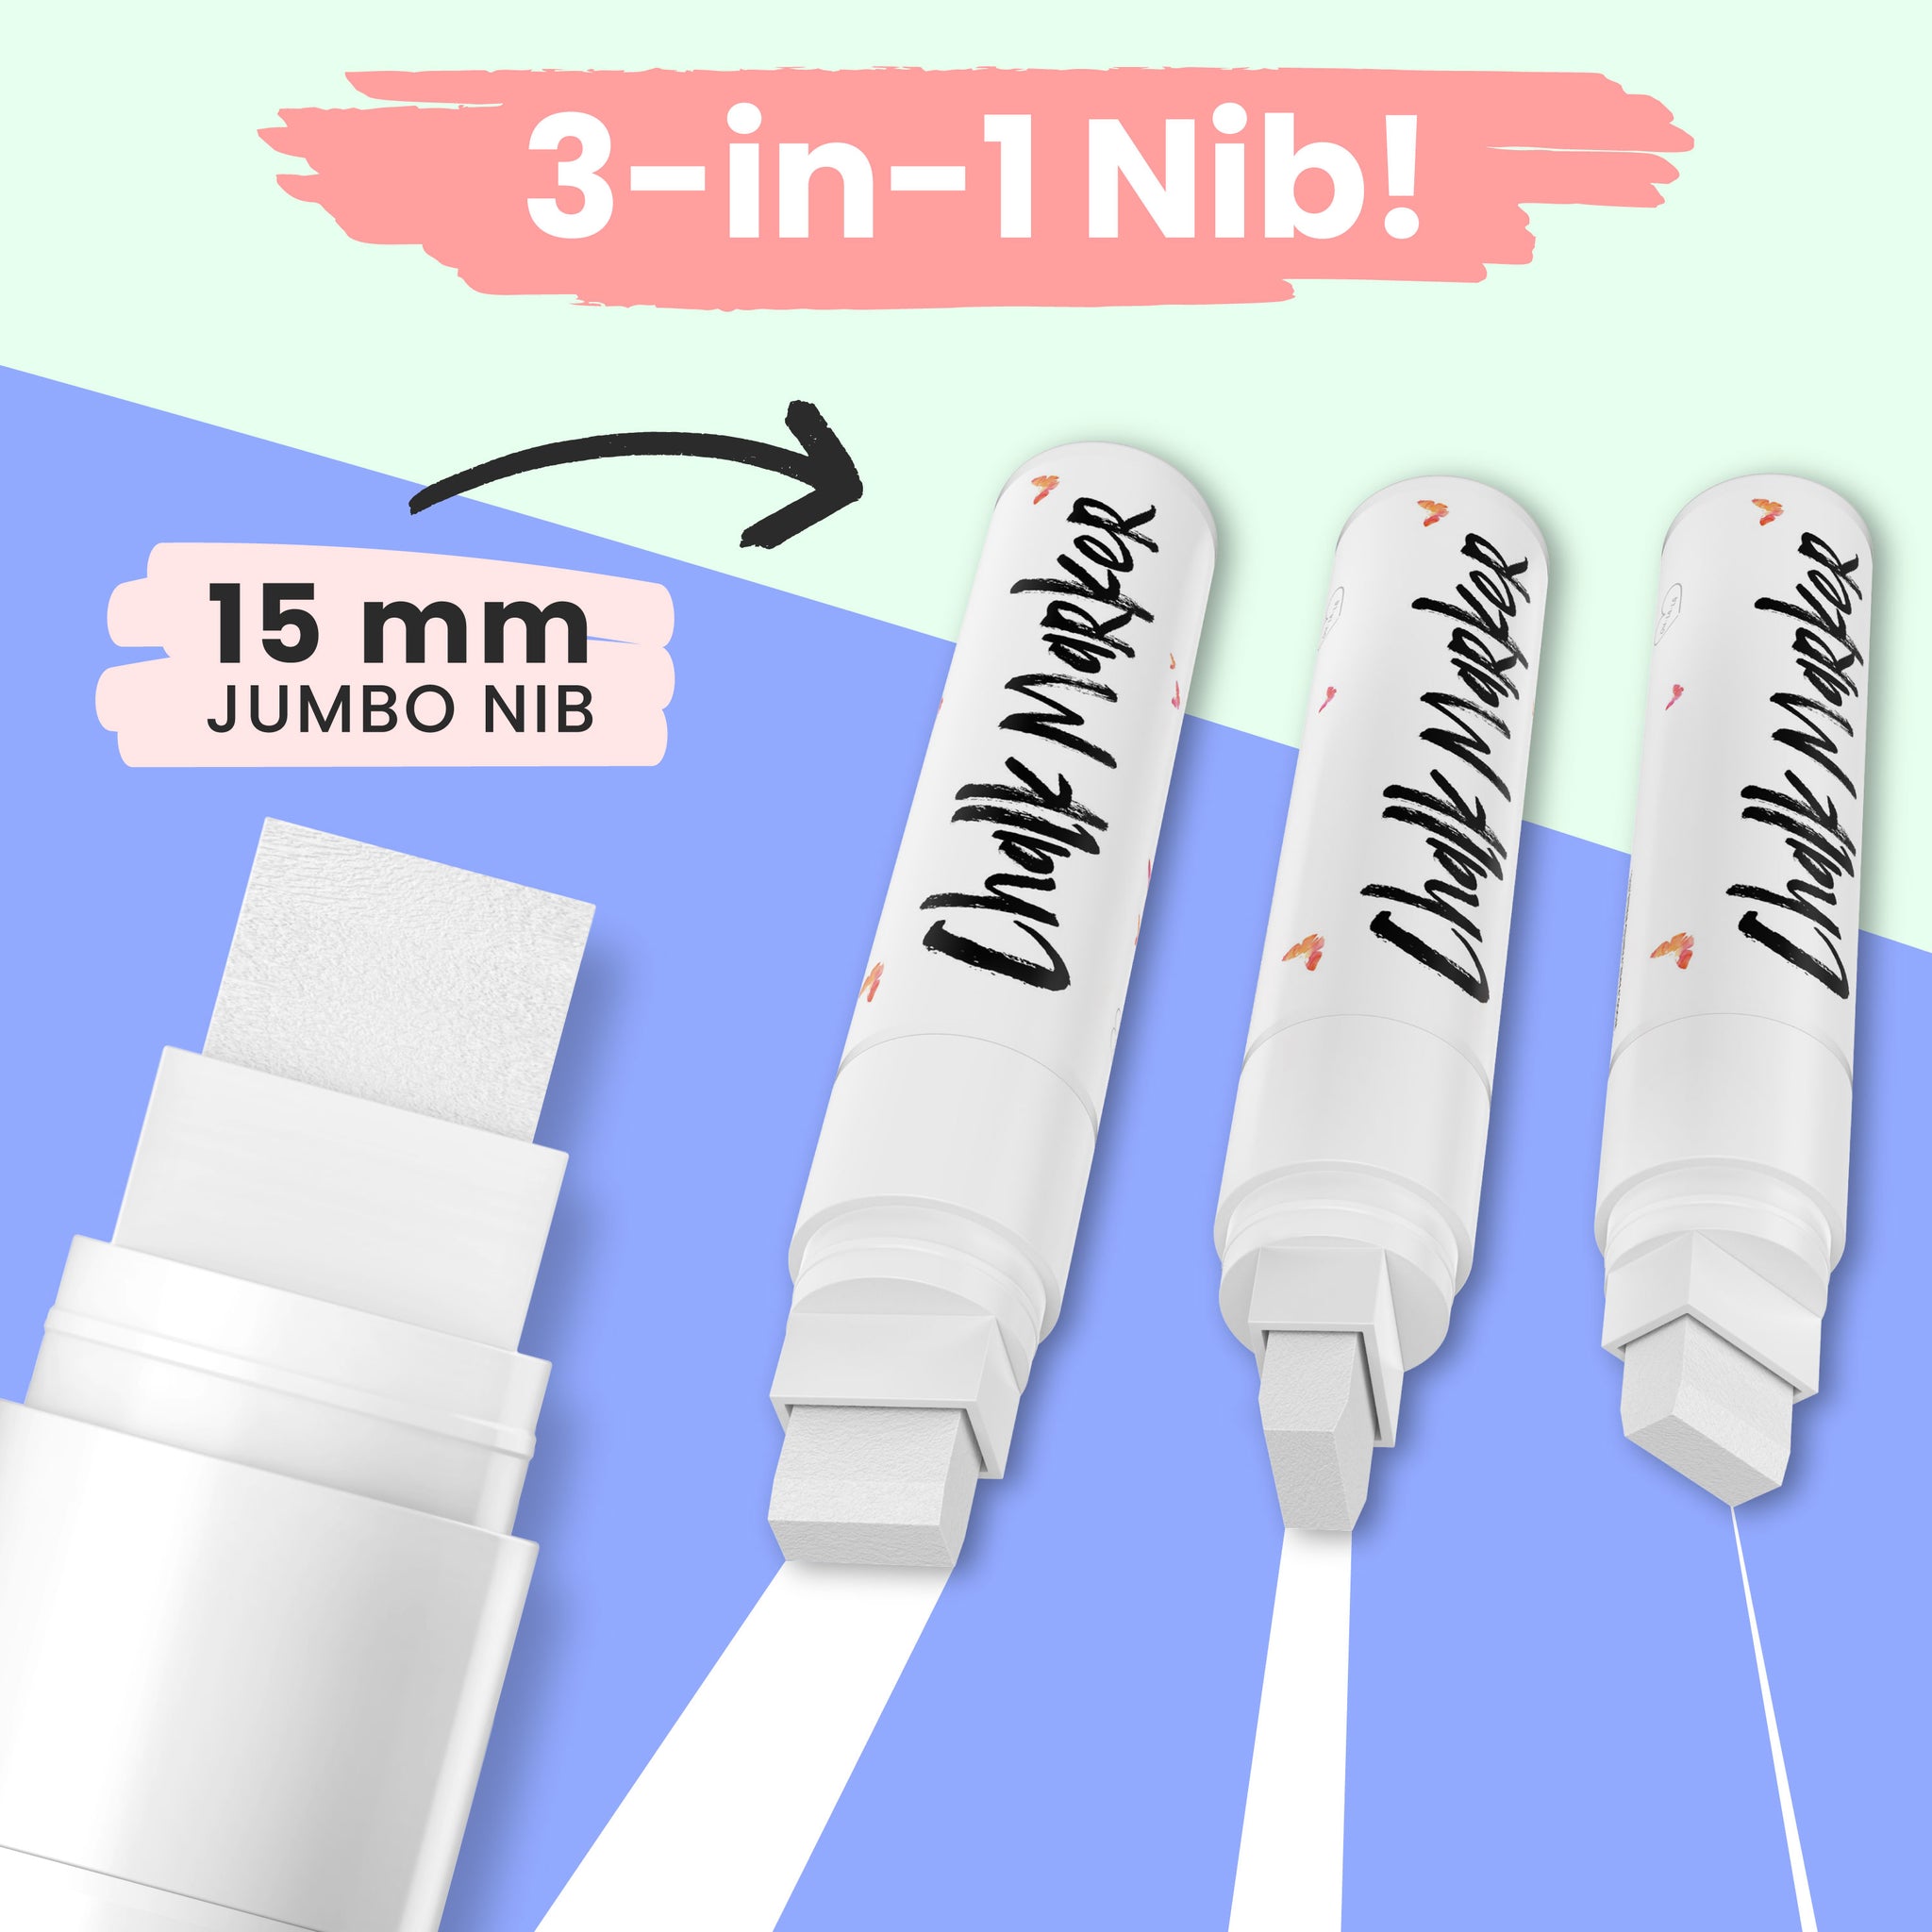 White Chalk Markers with Fine and Jumbo Nibs - Variety Pack of 7 Pens -  Chalkola Art Supply